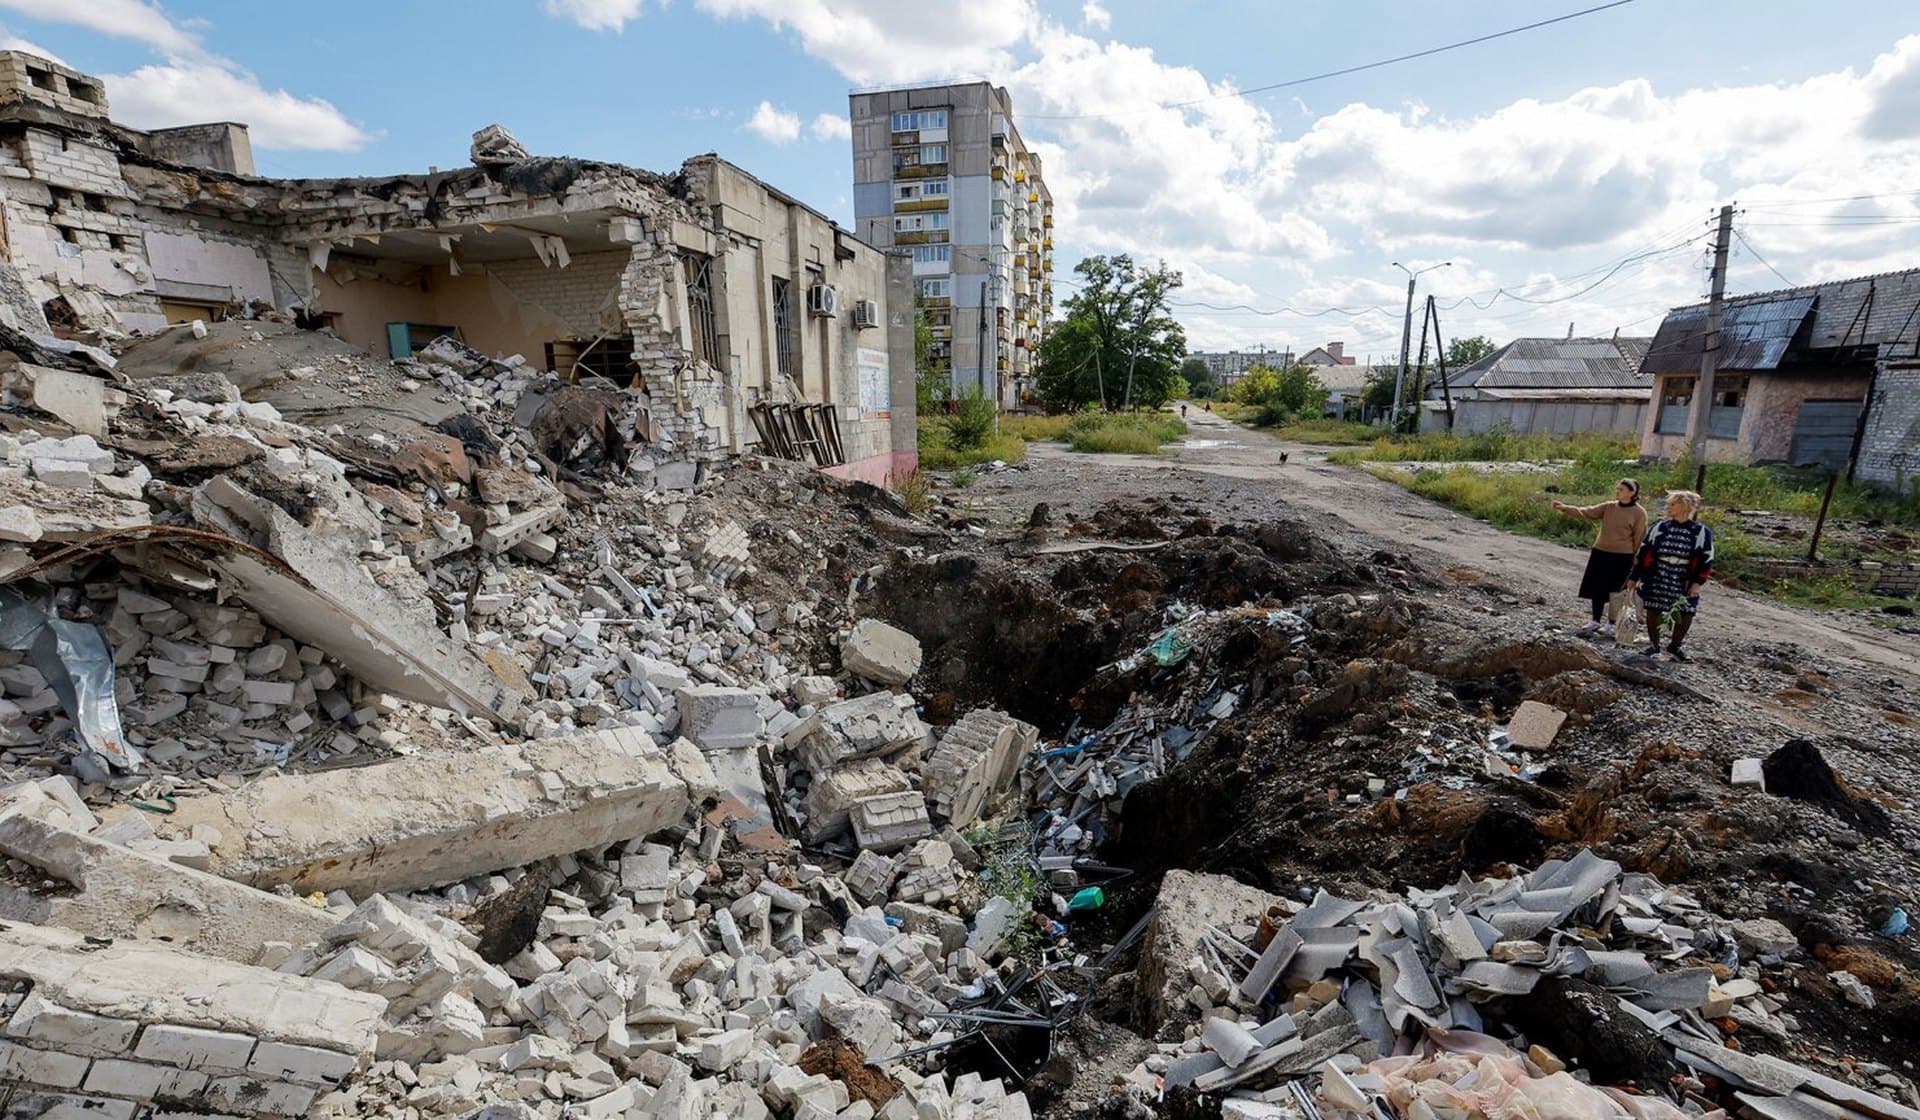 Local residents stand next to the debris of a destroyed building in Lysychansk